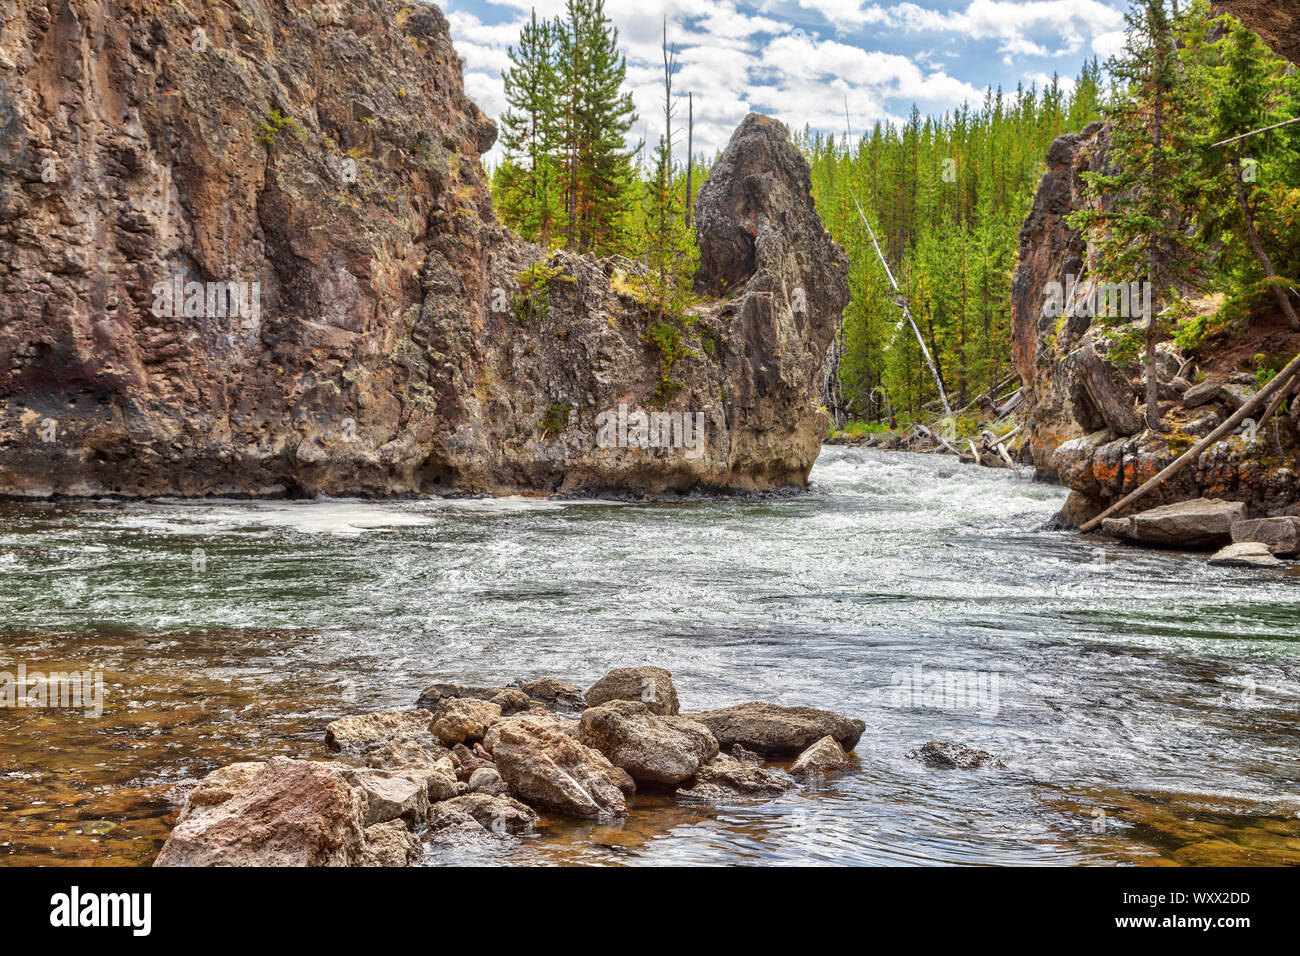 Firehole River in Yellowstone National Park, Wyoming, USA. The river flows through several significant geyser basins in Yellowstone National Park, inc Stock Photo